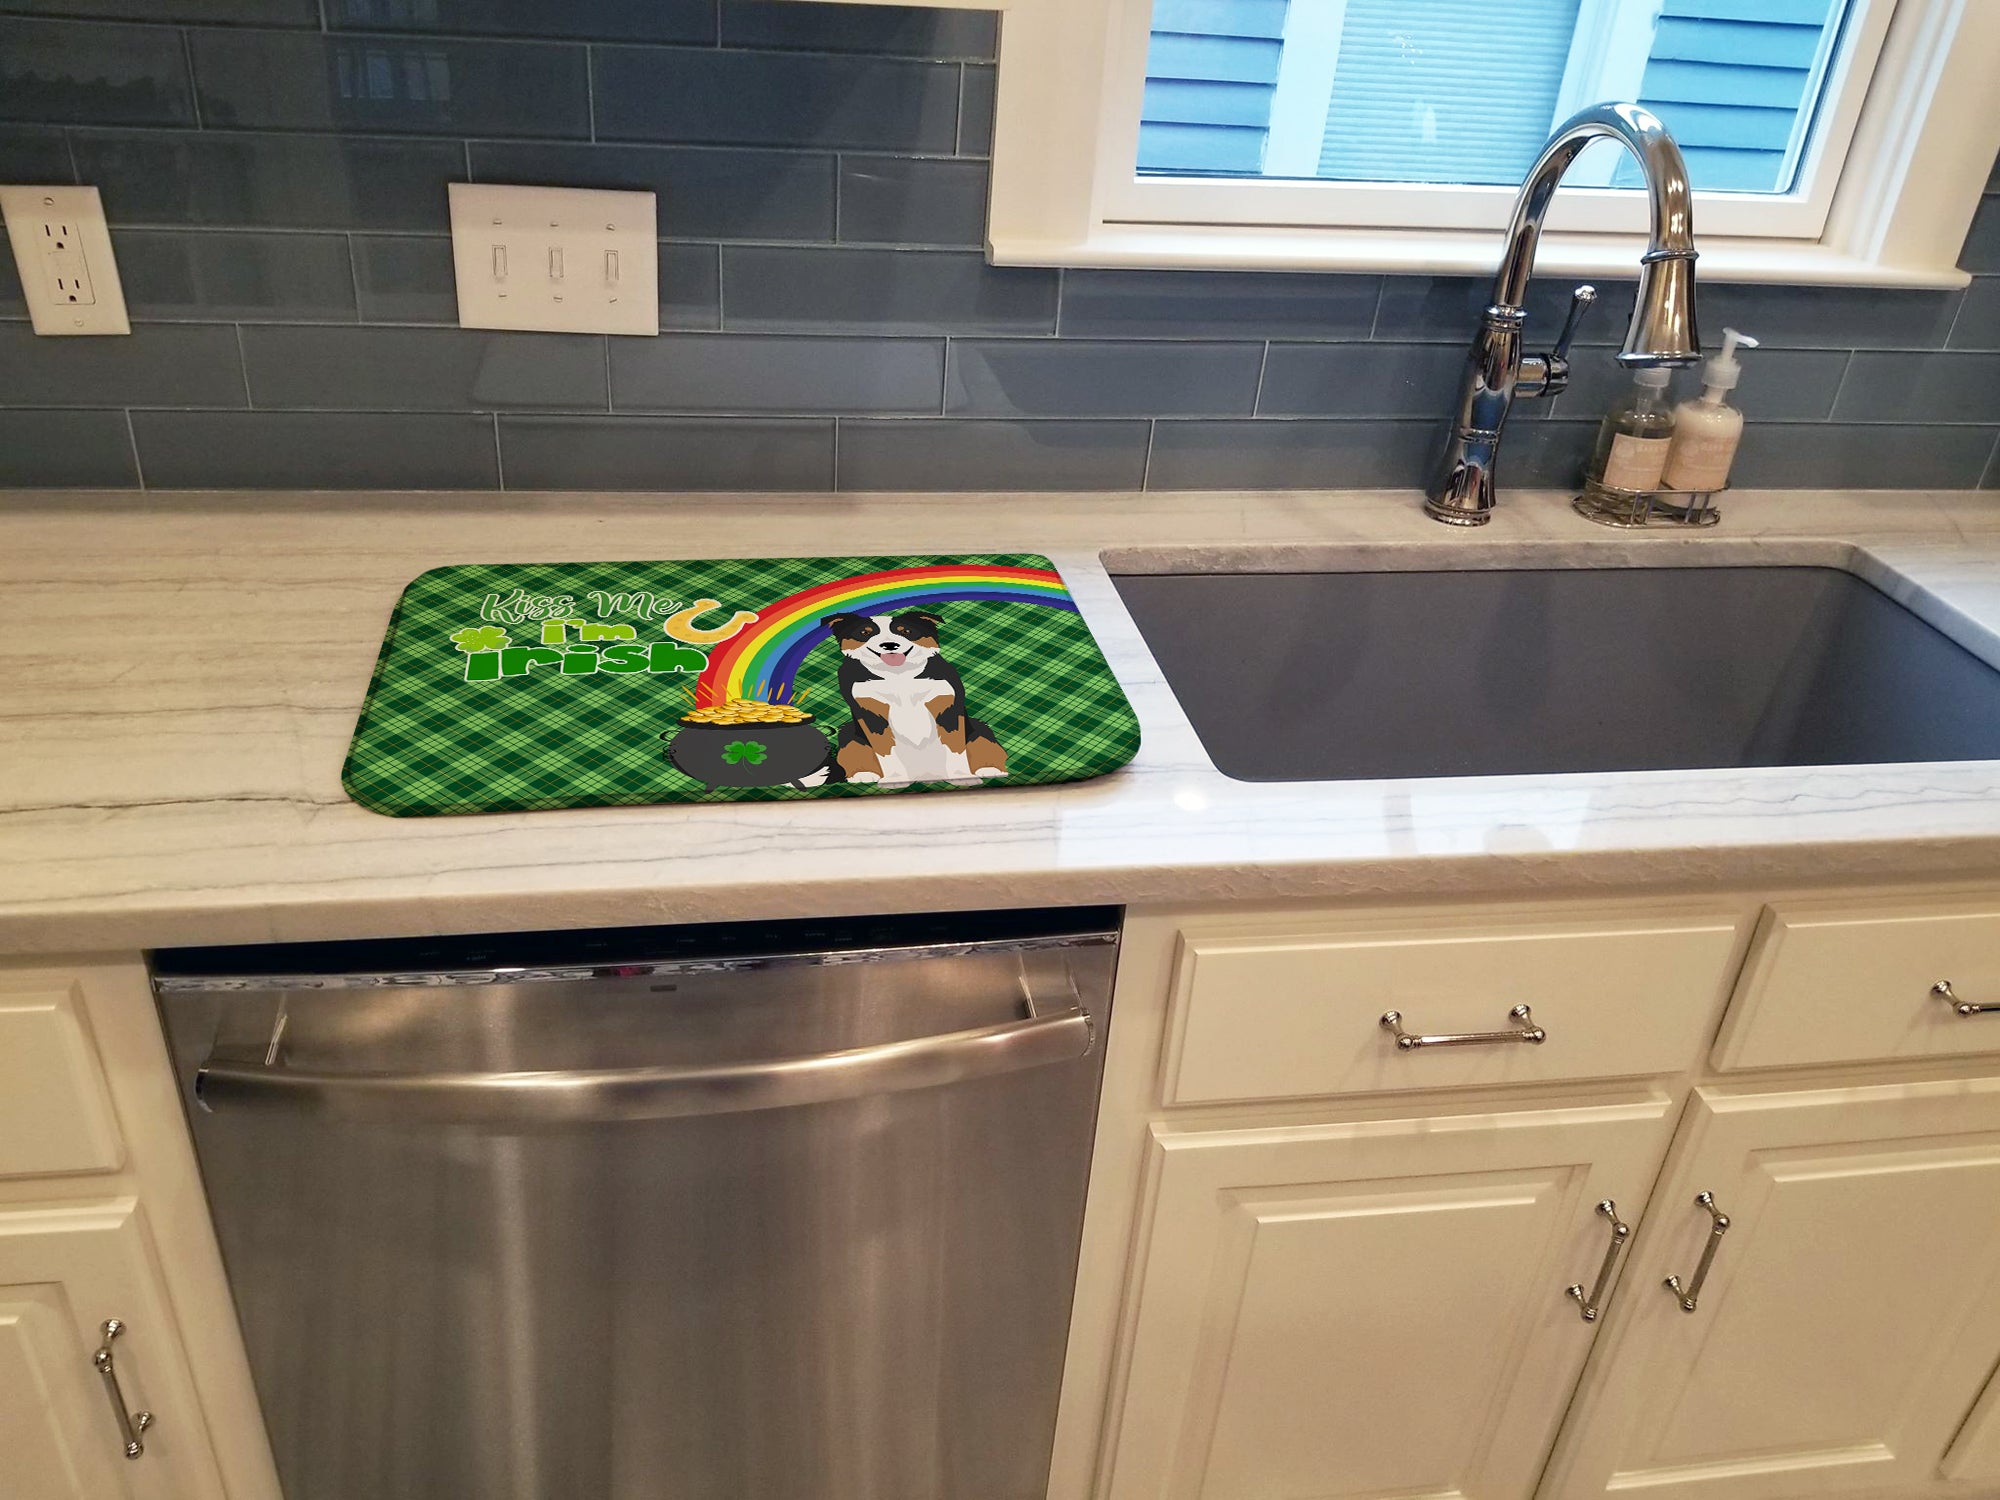 Tricolor Border Collie St. Patrick's Day Dish Drying Mat  the-store.com.